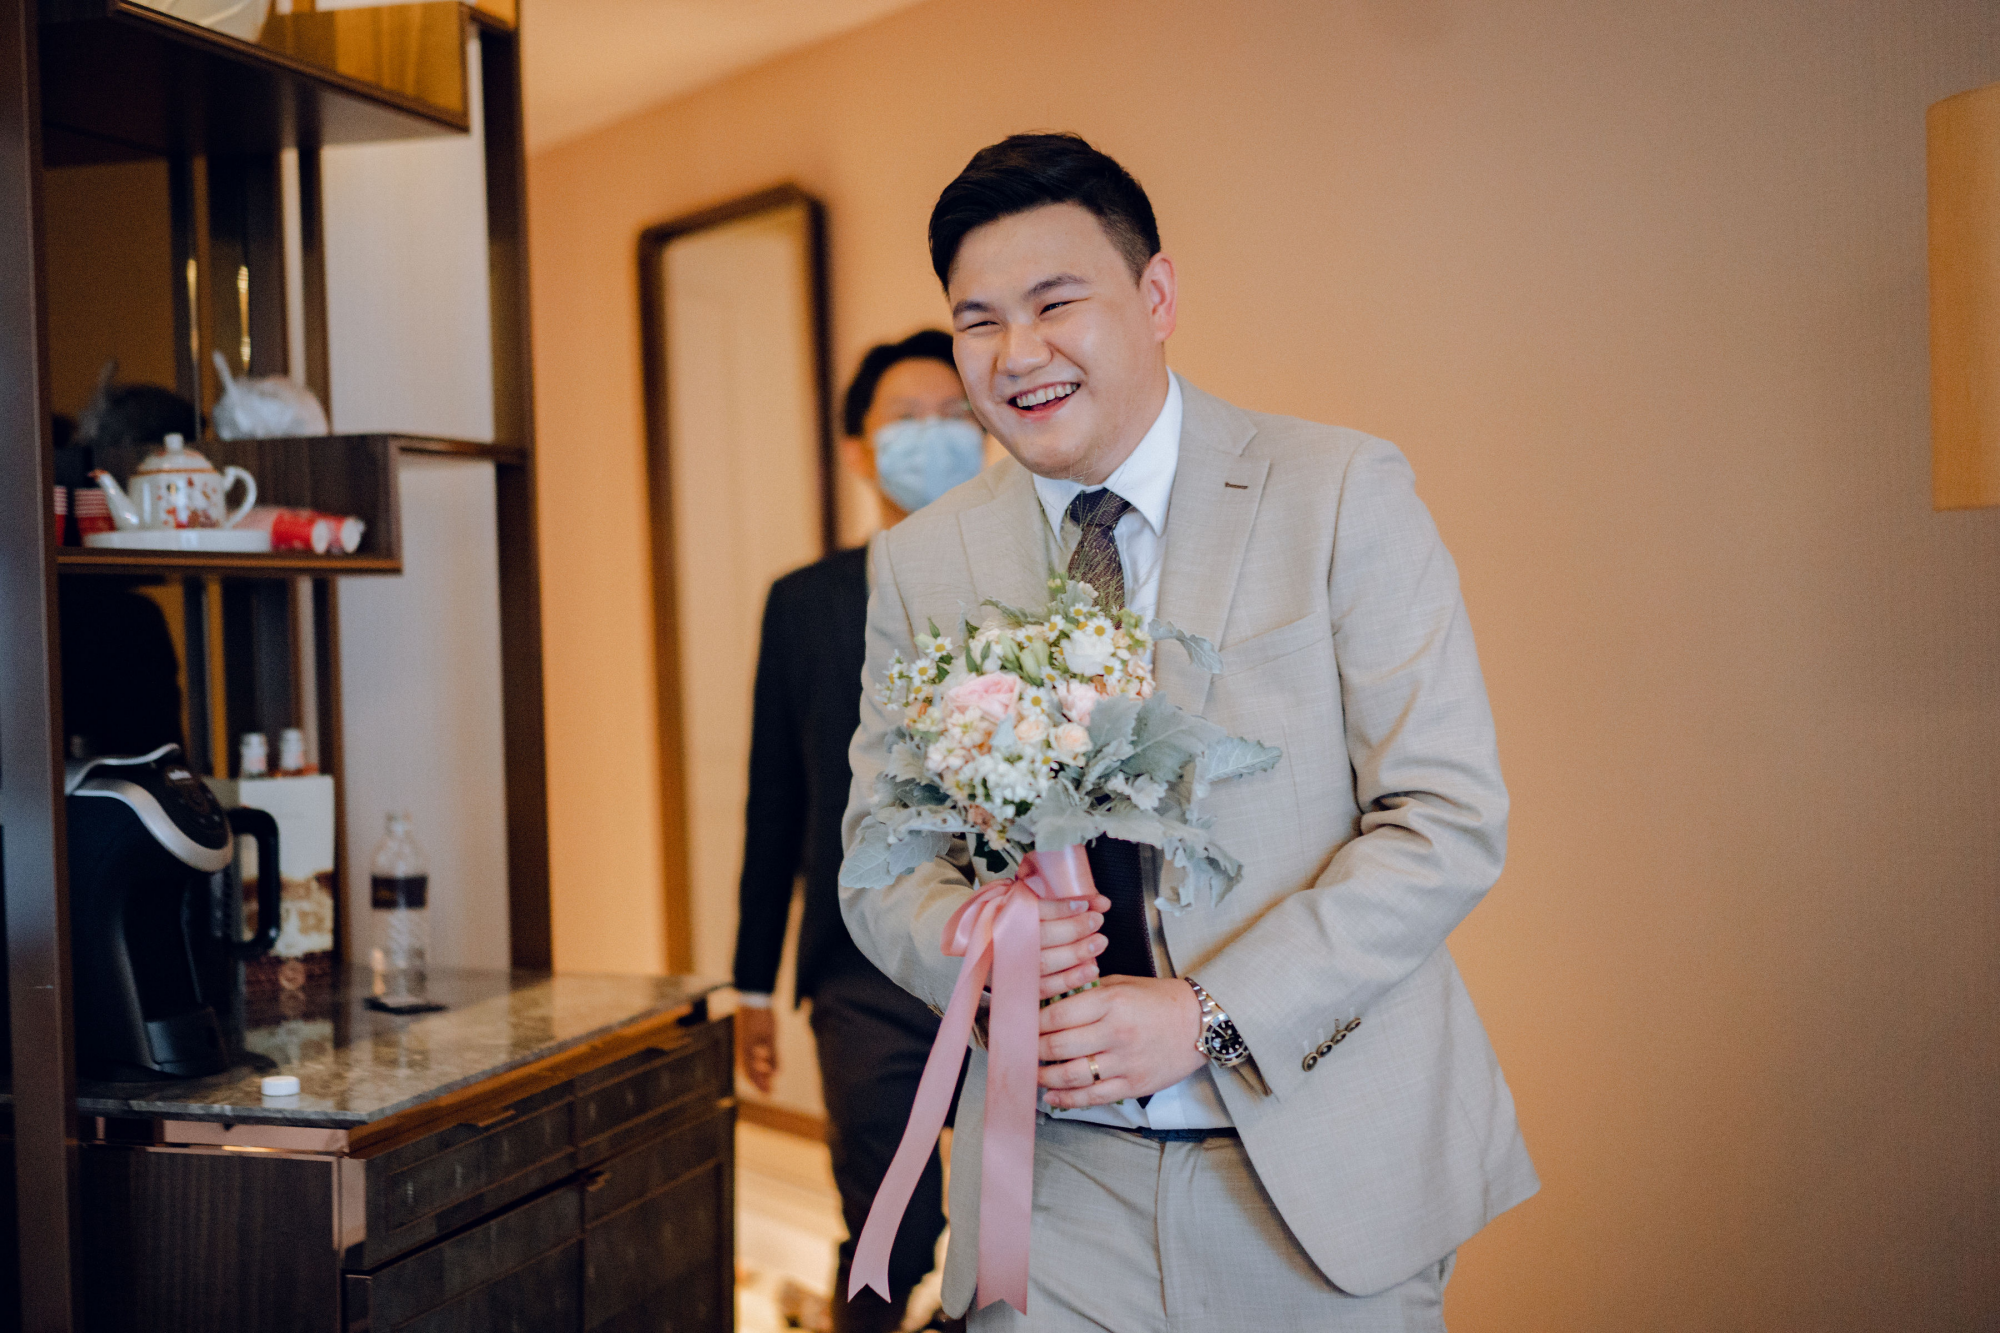 B & J Wedding Day Lunch Photography Coverage At St Regis Hotel by Sam on OneThreeOneFour 10